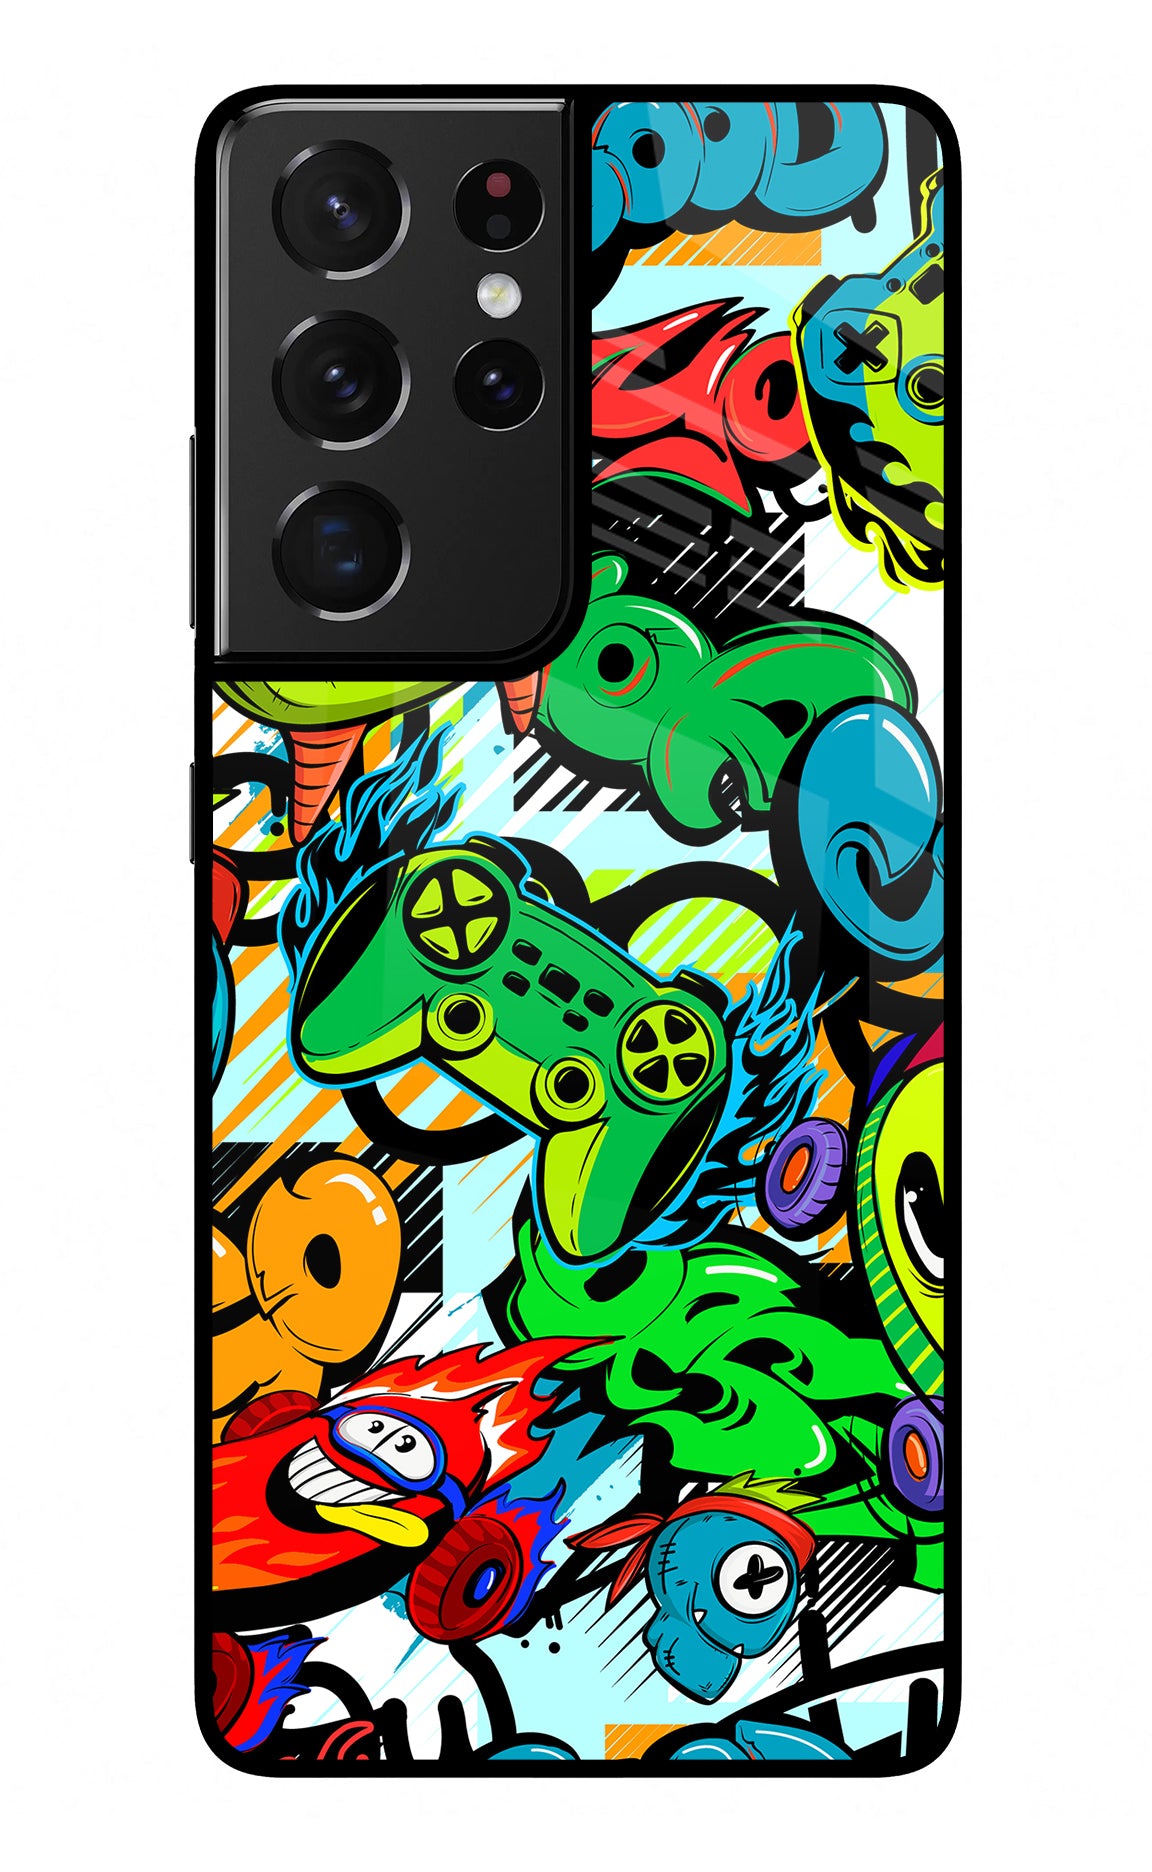 Game Doodle Samsung S21 Ultra Back Cover